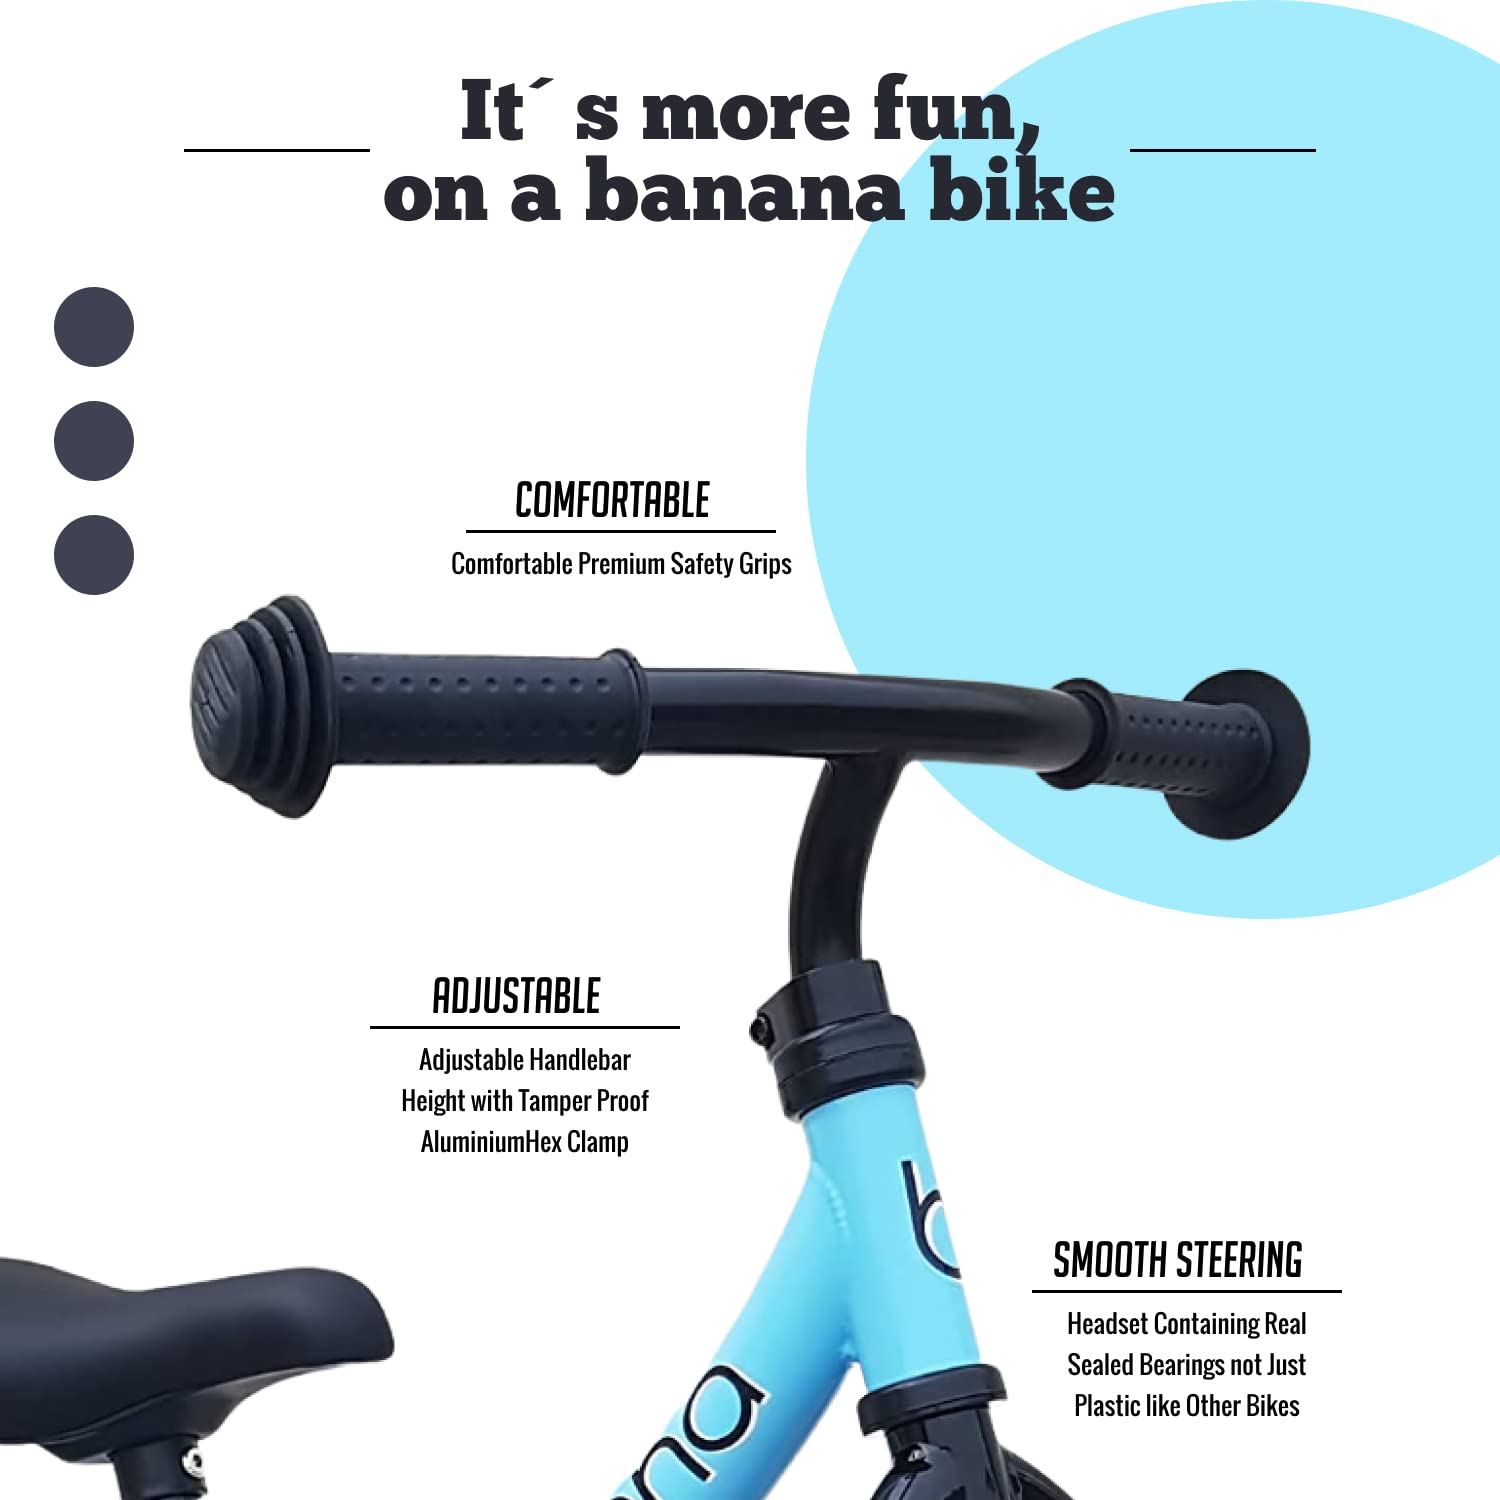 Banana LT Balance Bike - Lightweight Toddler Bike for 2, 3, 4, and 5 Year Old Boys and Girls - No Pedal Bikes for Kids with Adjustable Handlebar and seat - Aluminium, EVA Tires - Training Bike (Blue) - image 3 of 6